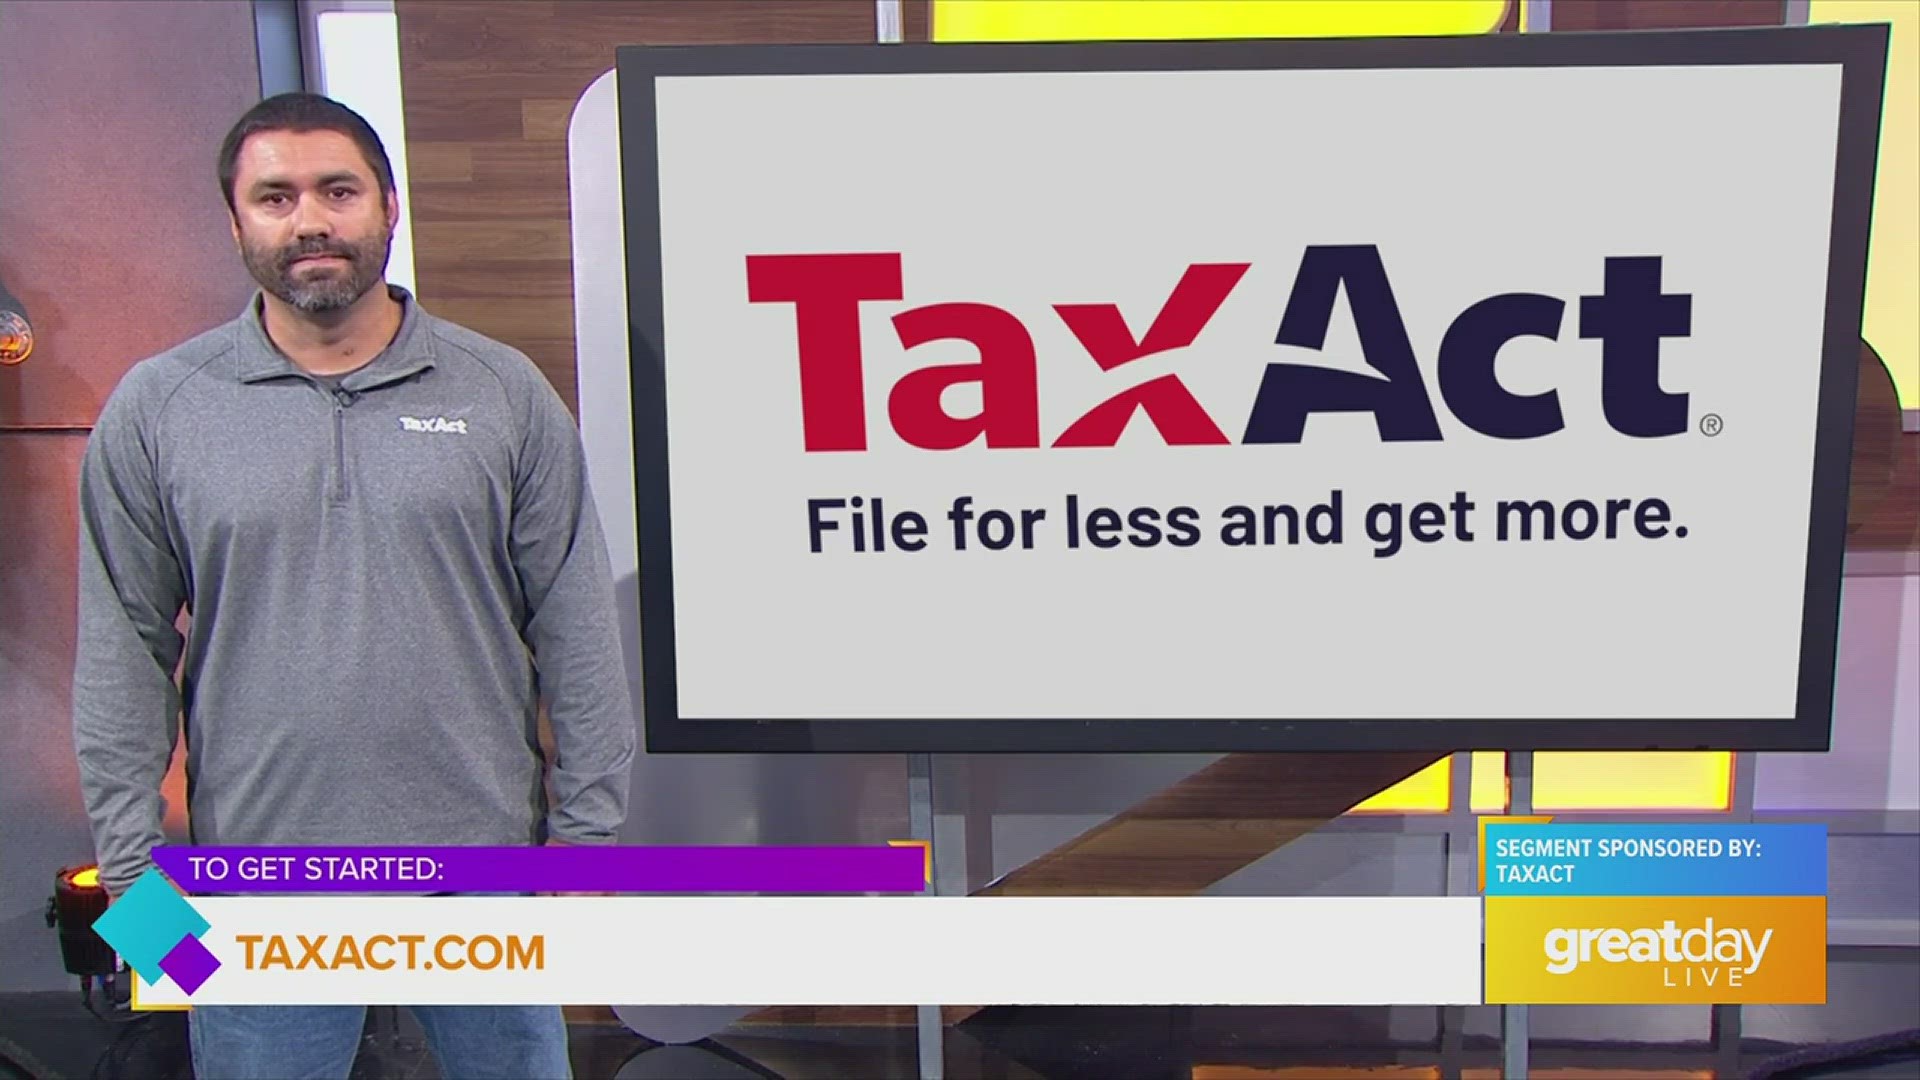 Learn more at taxact.com